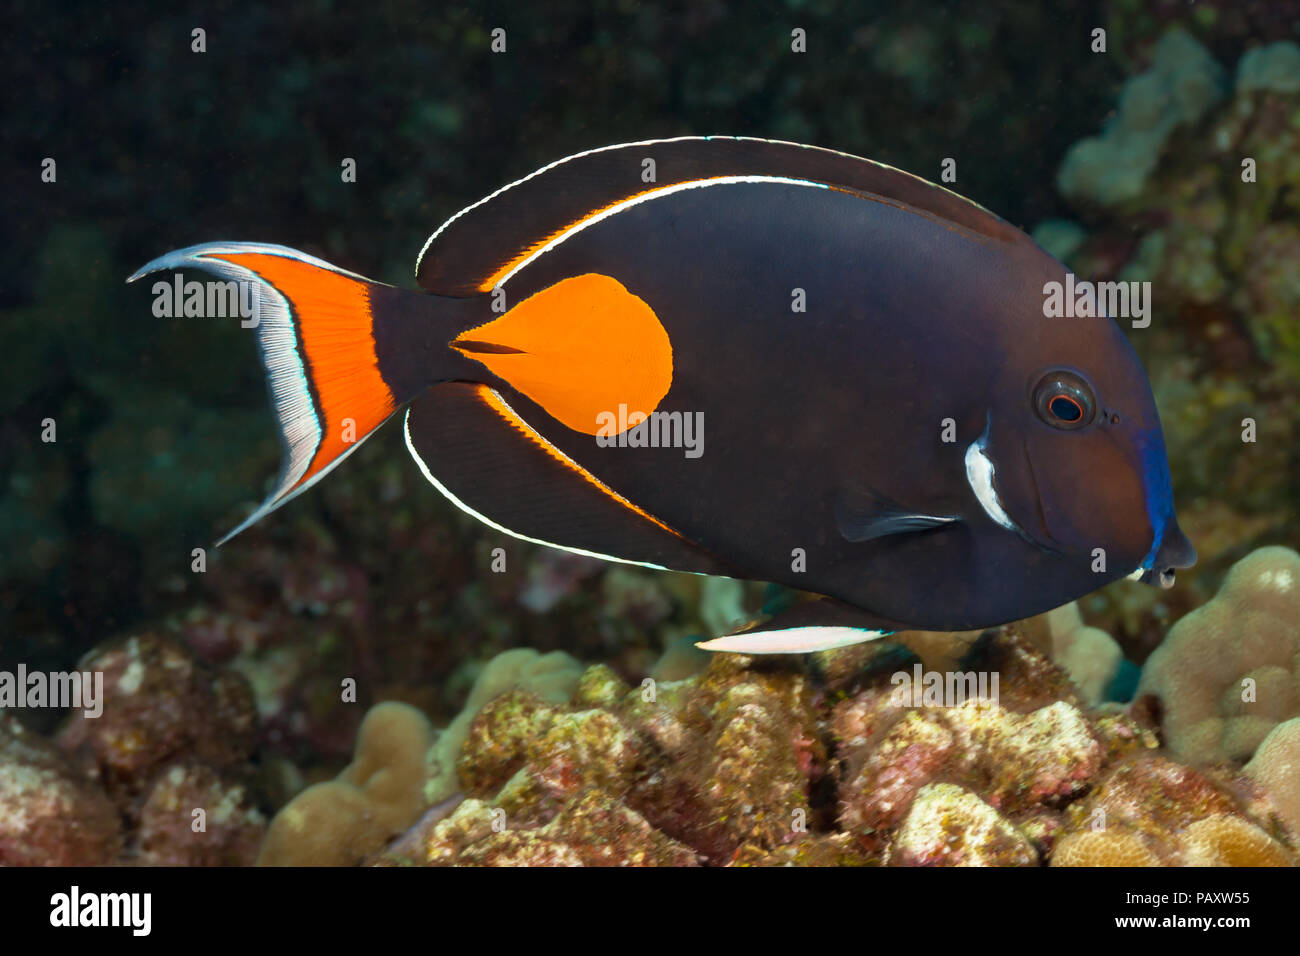 The achilles tang, Acanthurus achilles, reaches 10 inches in length, Hawaii. Stock Photo